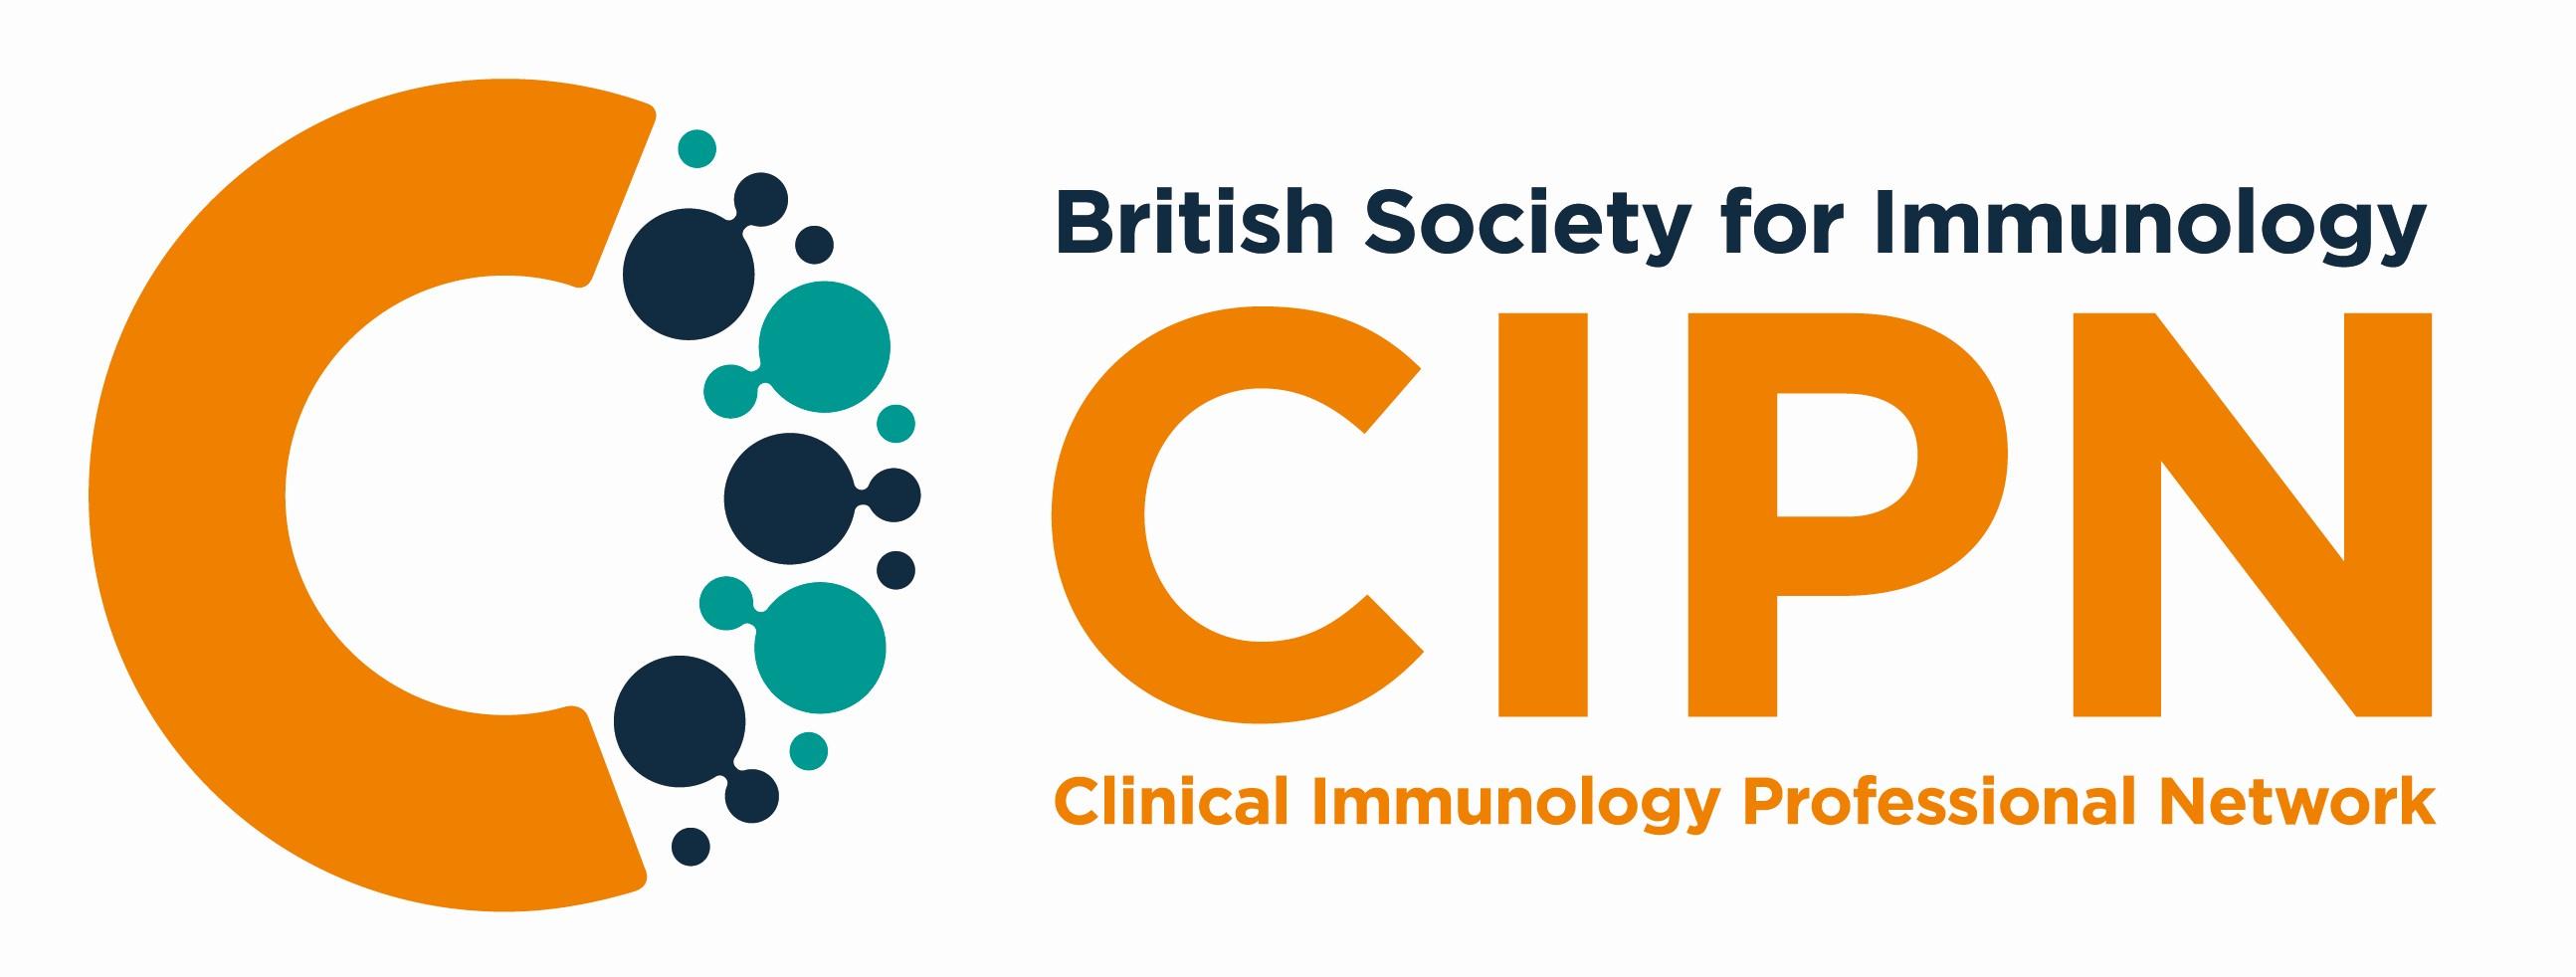 Logo for the BSI-CIPN featuring a circle concept with the text British Society for Immunology Clinical Immunology Professional Network